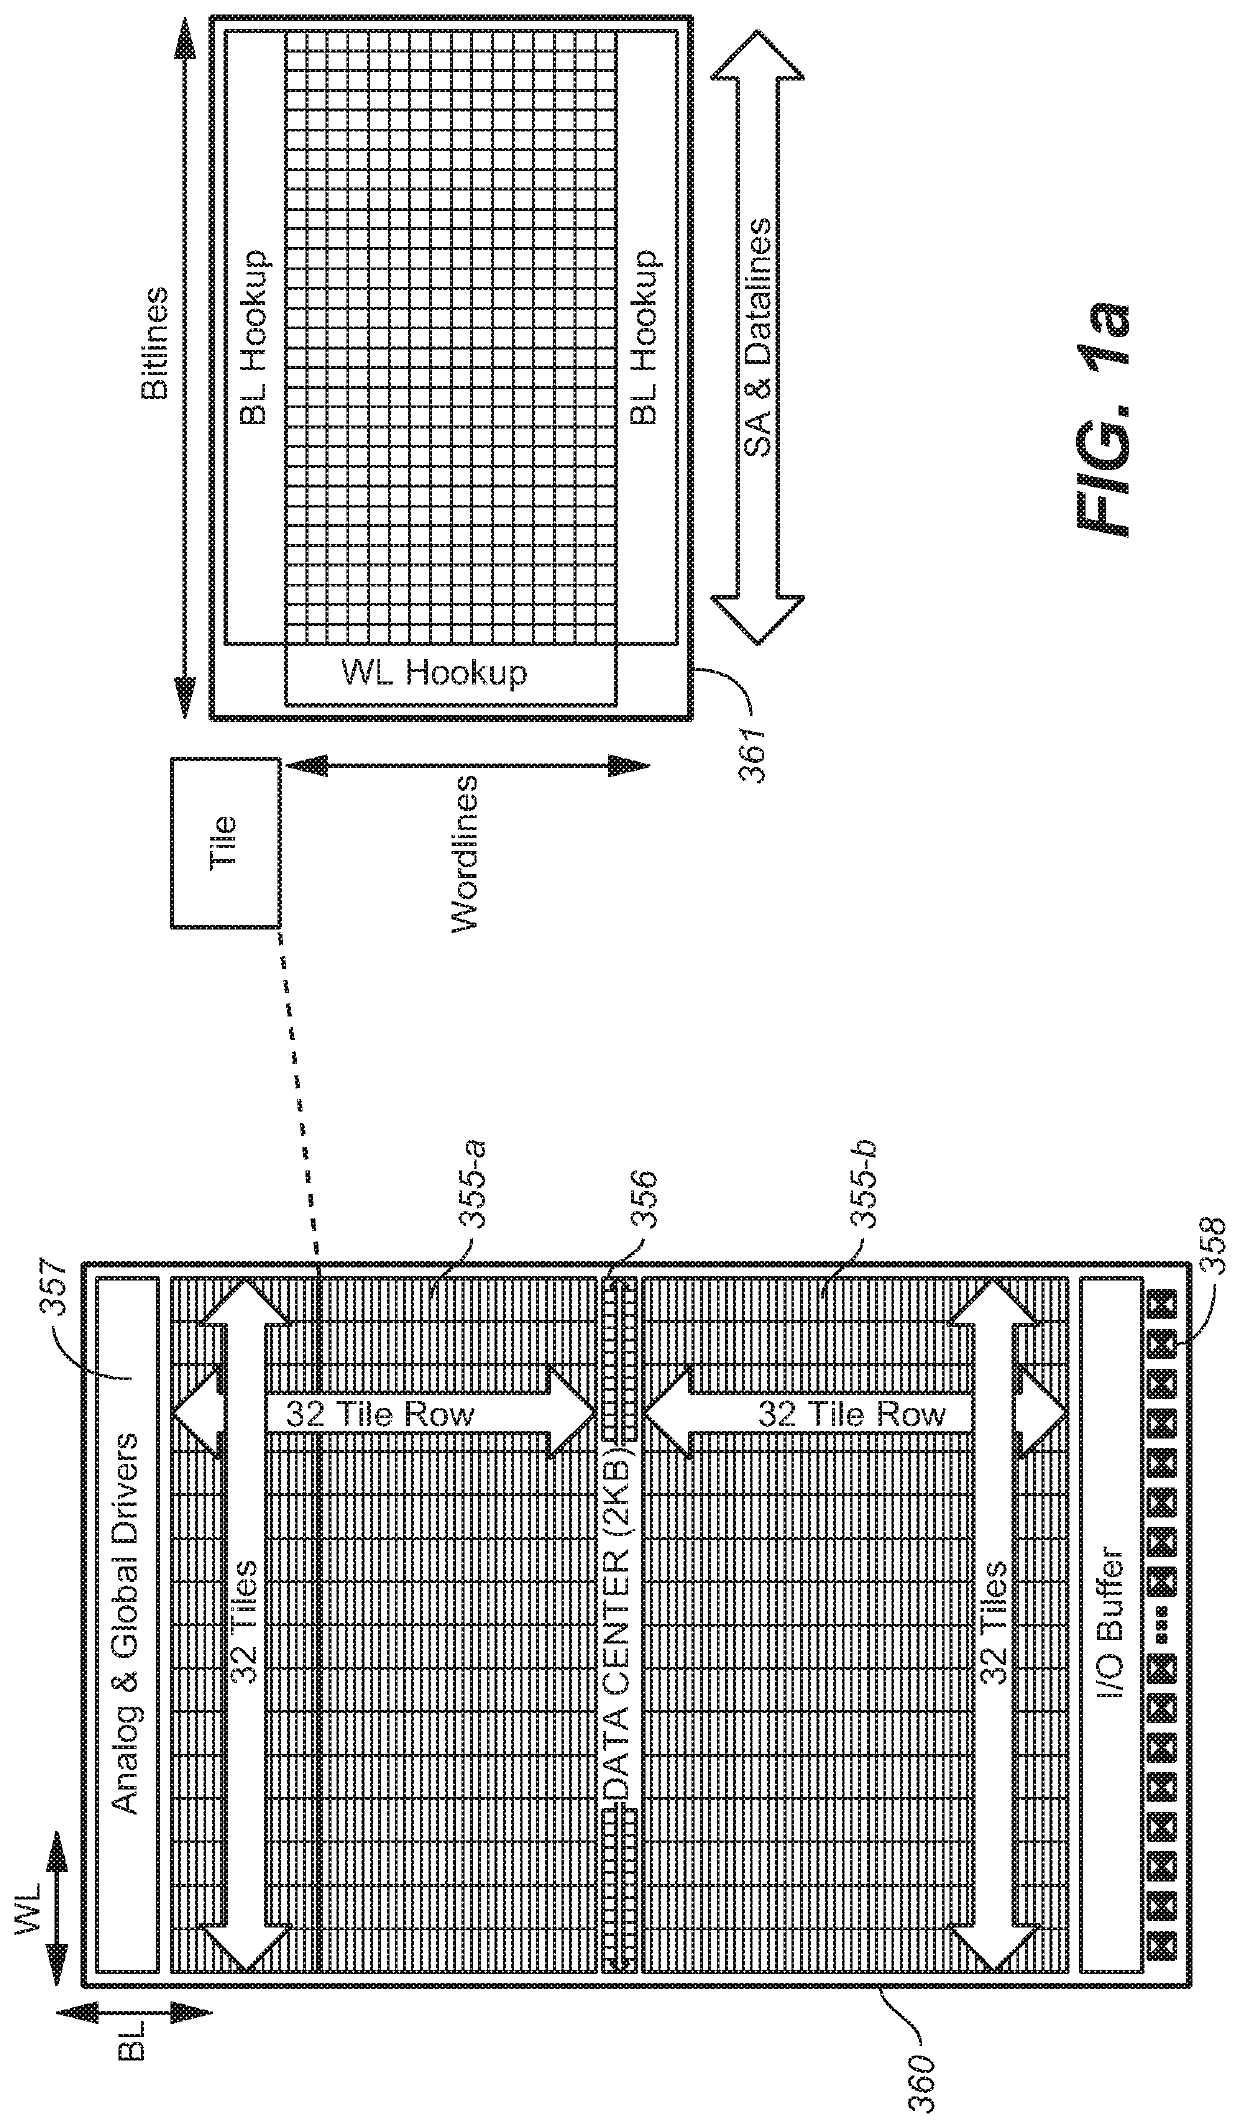 Device with embedded high-bandwidth, high-capacity memory using wafer bonding